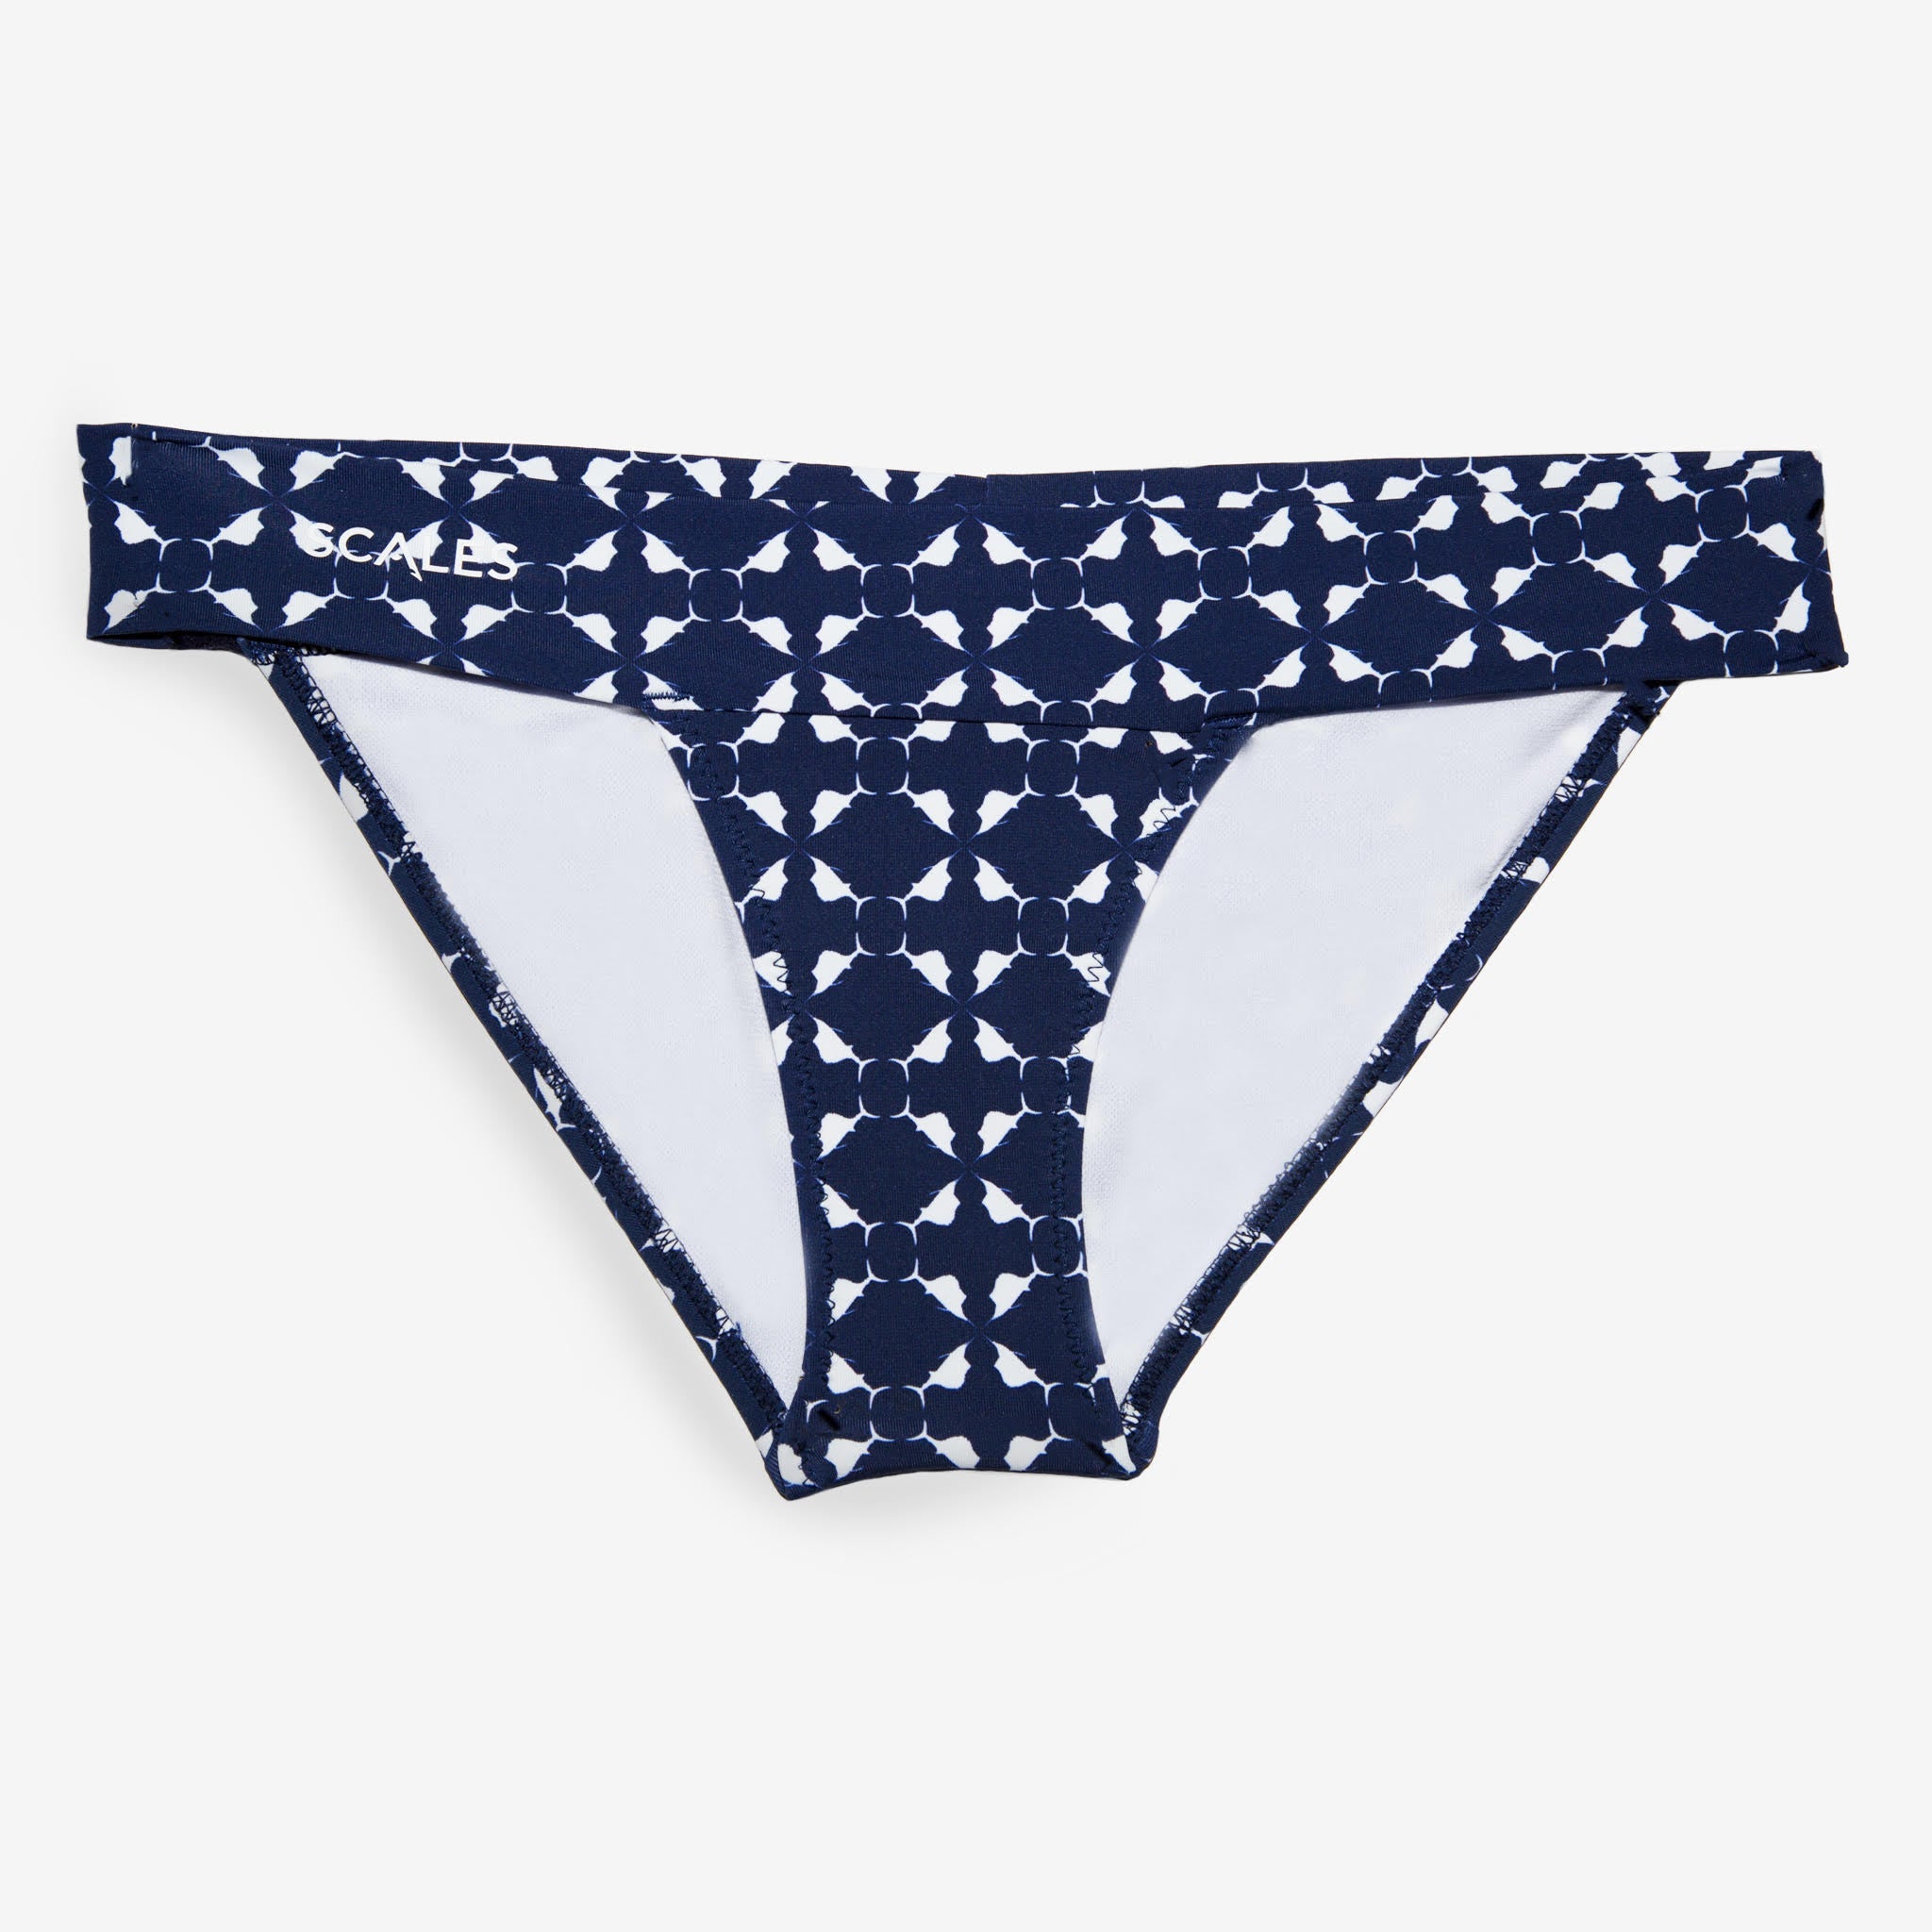 Scales Women's Swimwear Nautical Sailfish Banded Bottom Added Coverage in Navy Size S